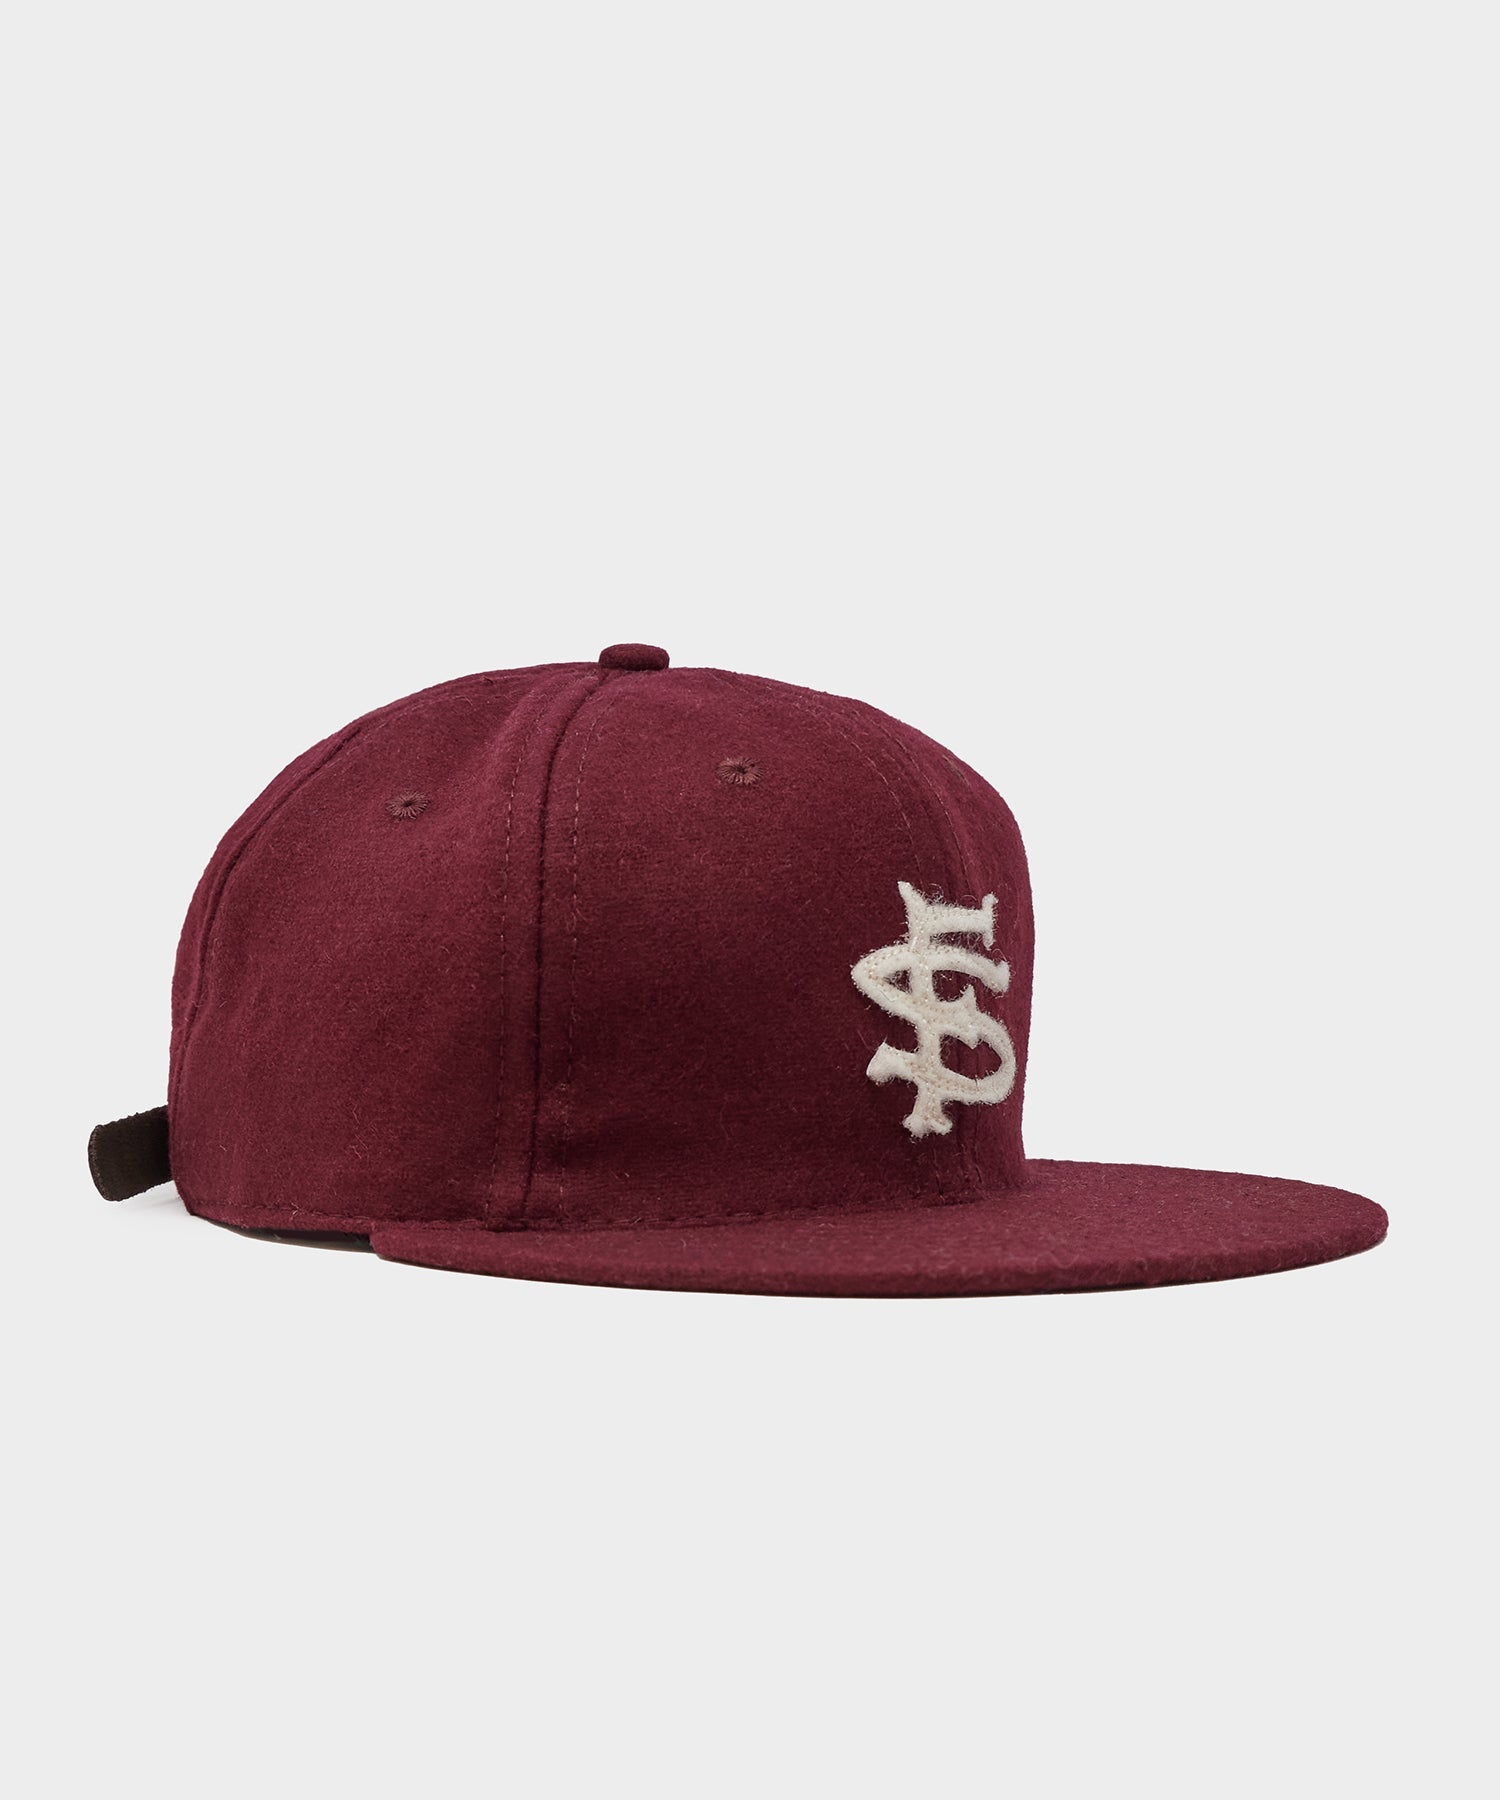 Exclusive Ebbets SF Cap in Burgundy